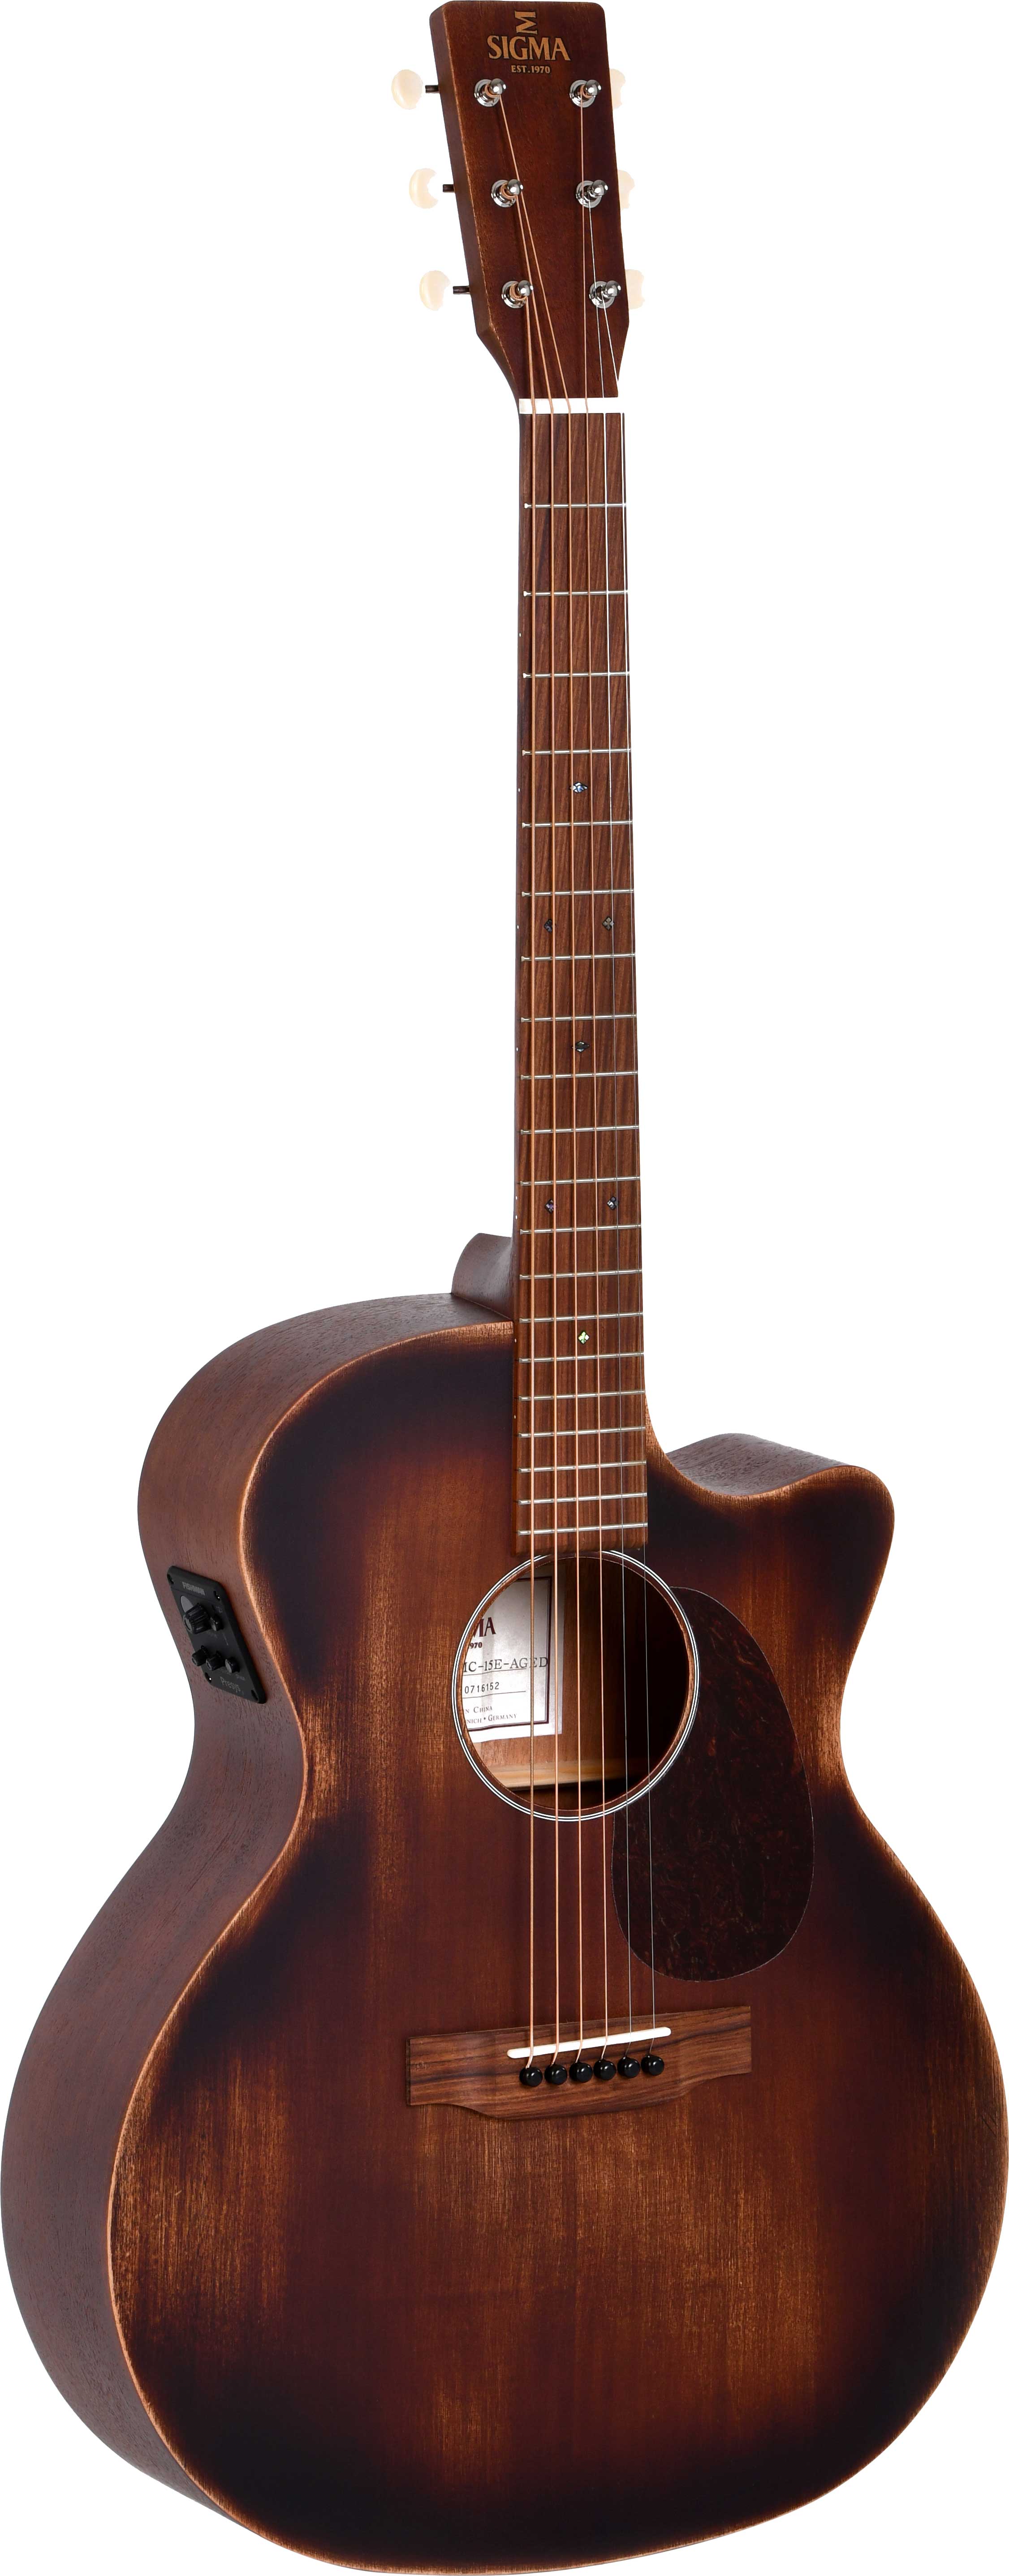 An image of Sigma Grand GMC-15E-AGED Acoustic Guitar